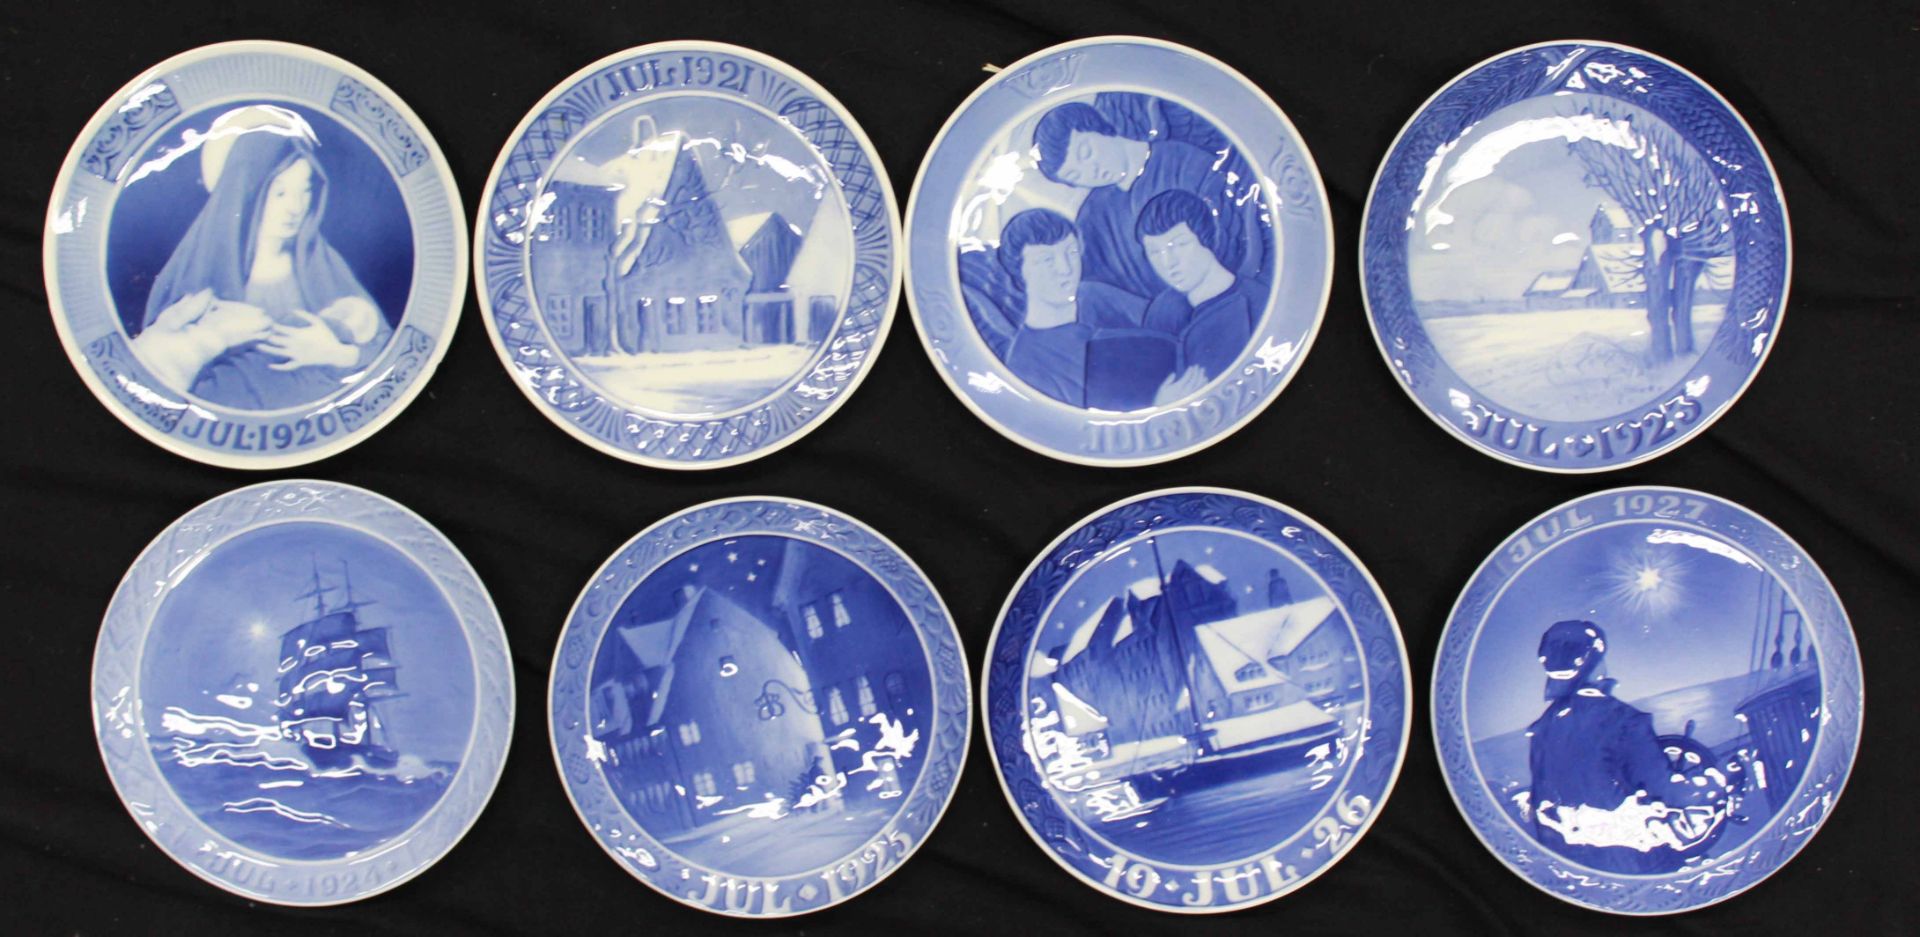 94 Christmas plates - Royal Copenhagen. Complete series from 1910-2004. - Image 8 of 28